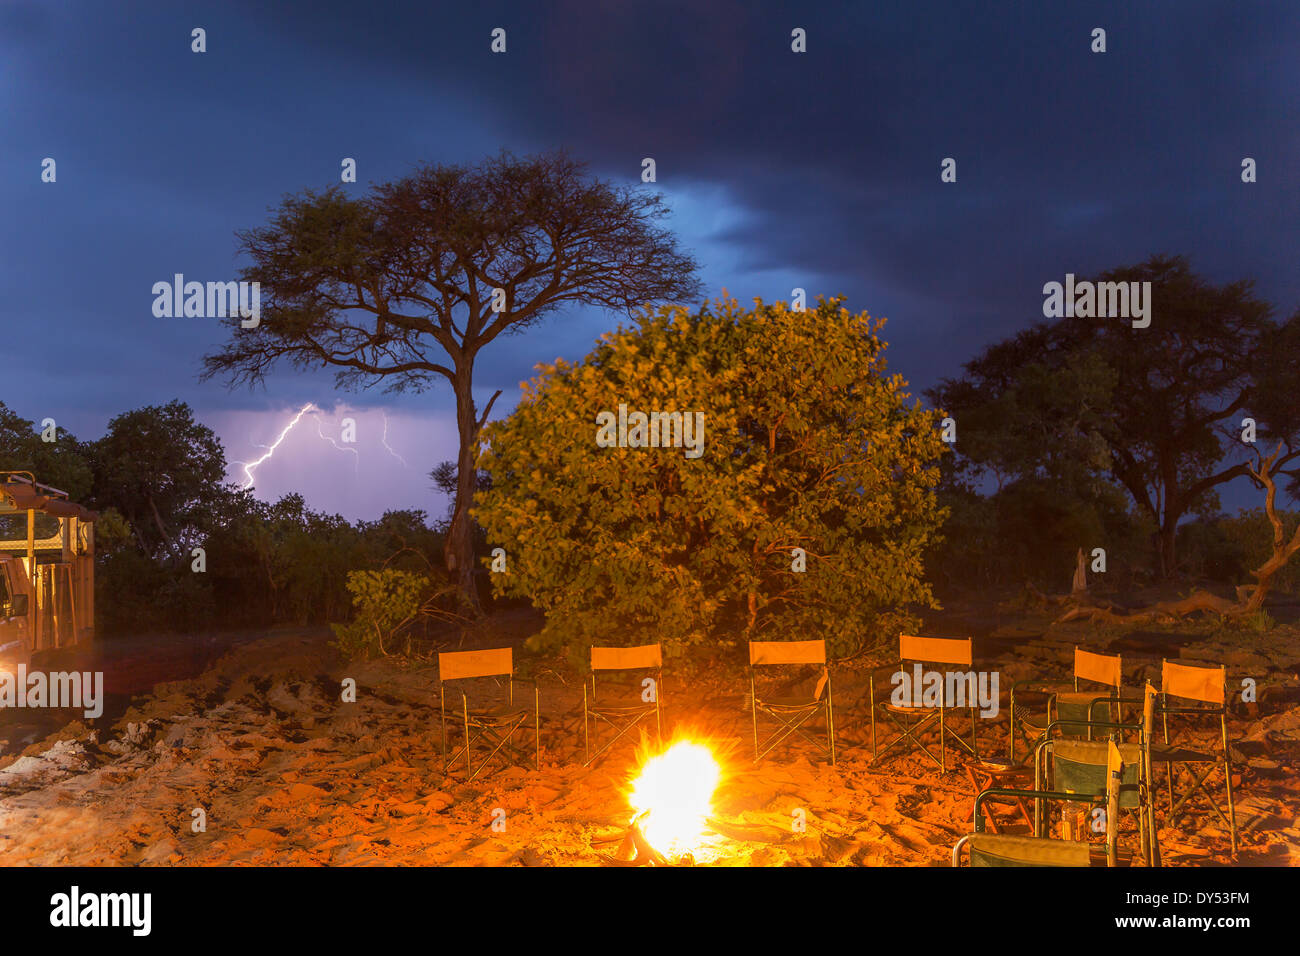 Campfire and a row of empty chairs at night, Kasane, Chobe National Park, Botswana, Africa Stock Photo